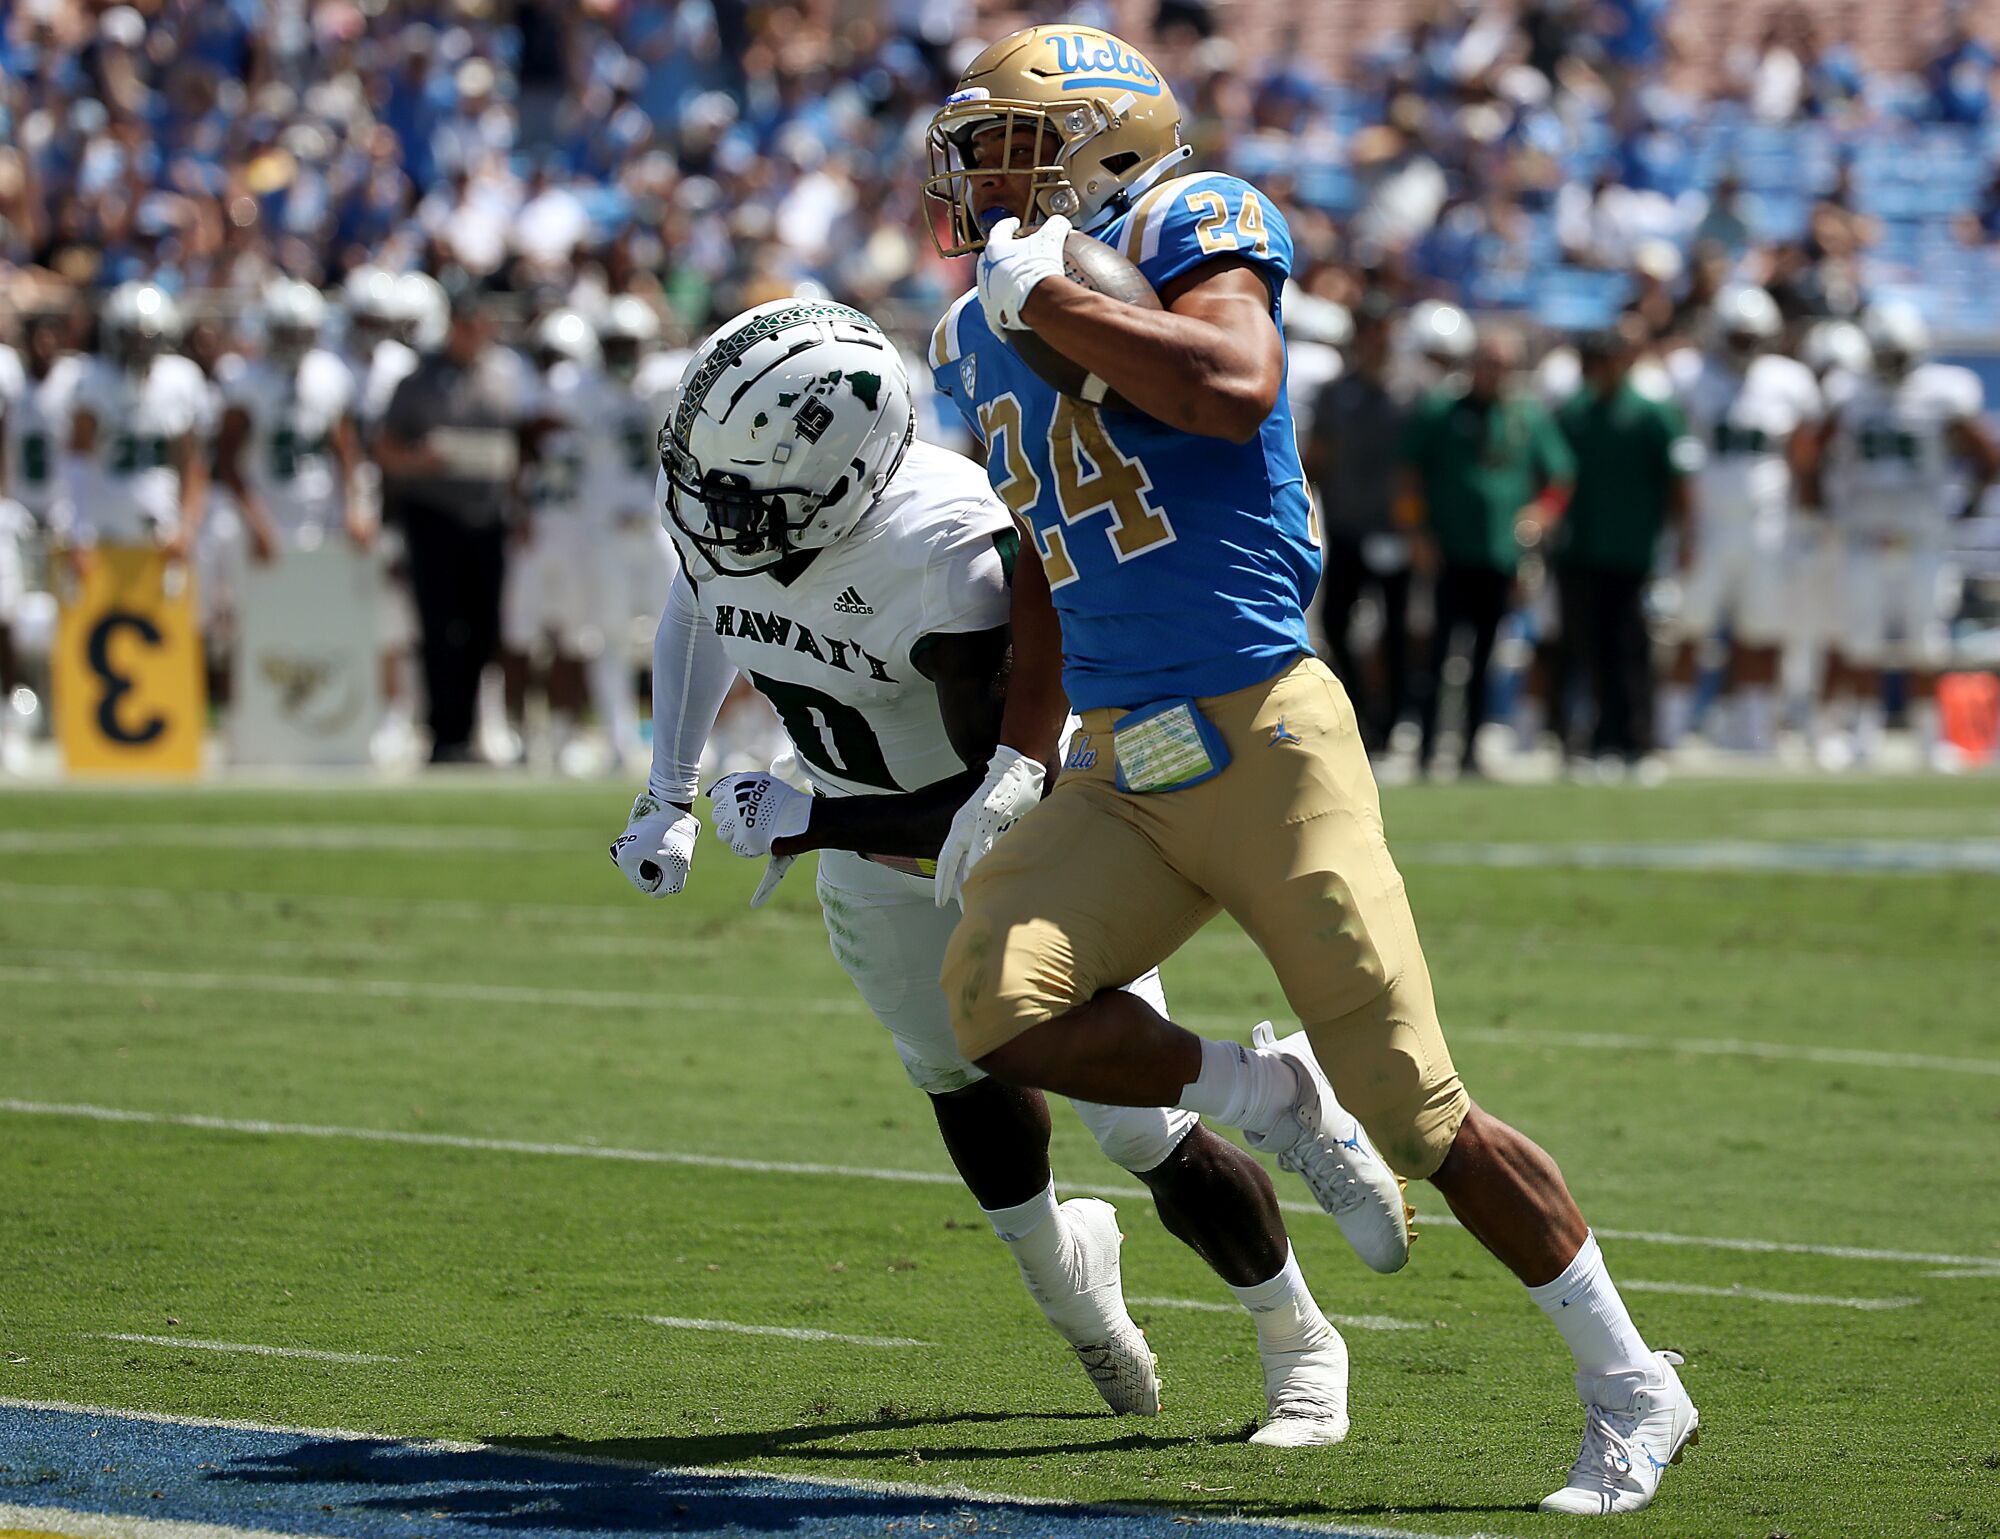 UCLA running back Zach Charbonnet gets past Hawaii safety Chima Azunna to score a touchdown in the second quarter.